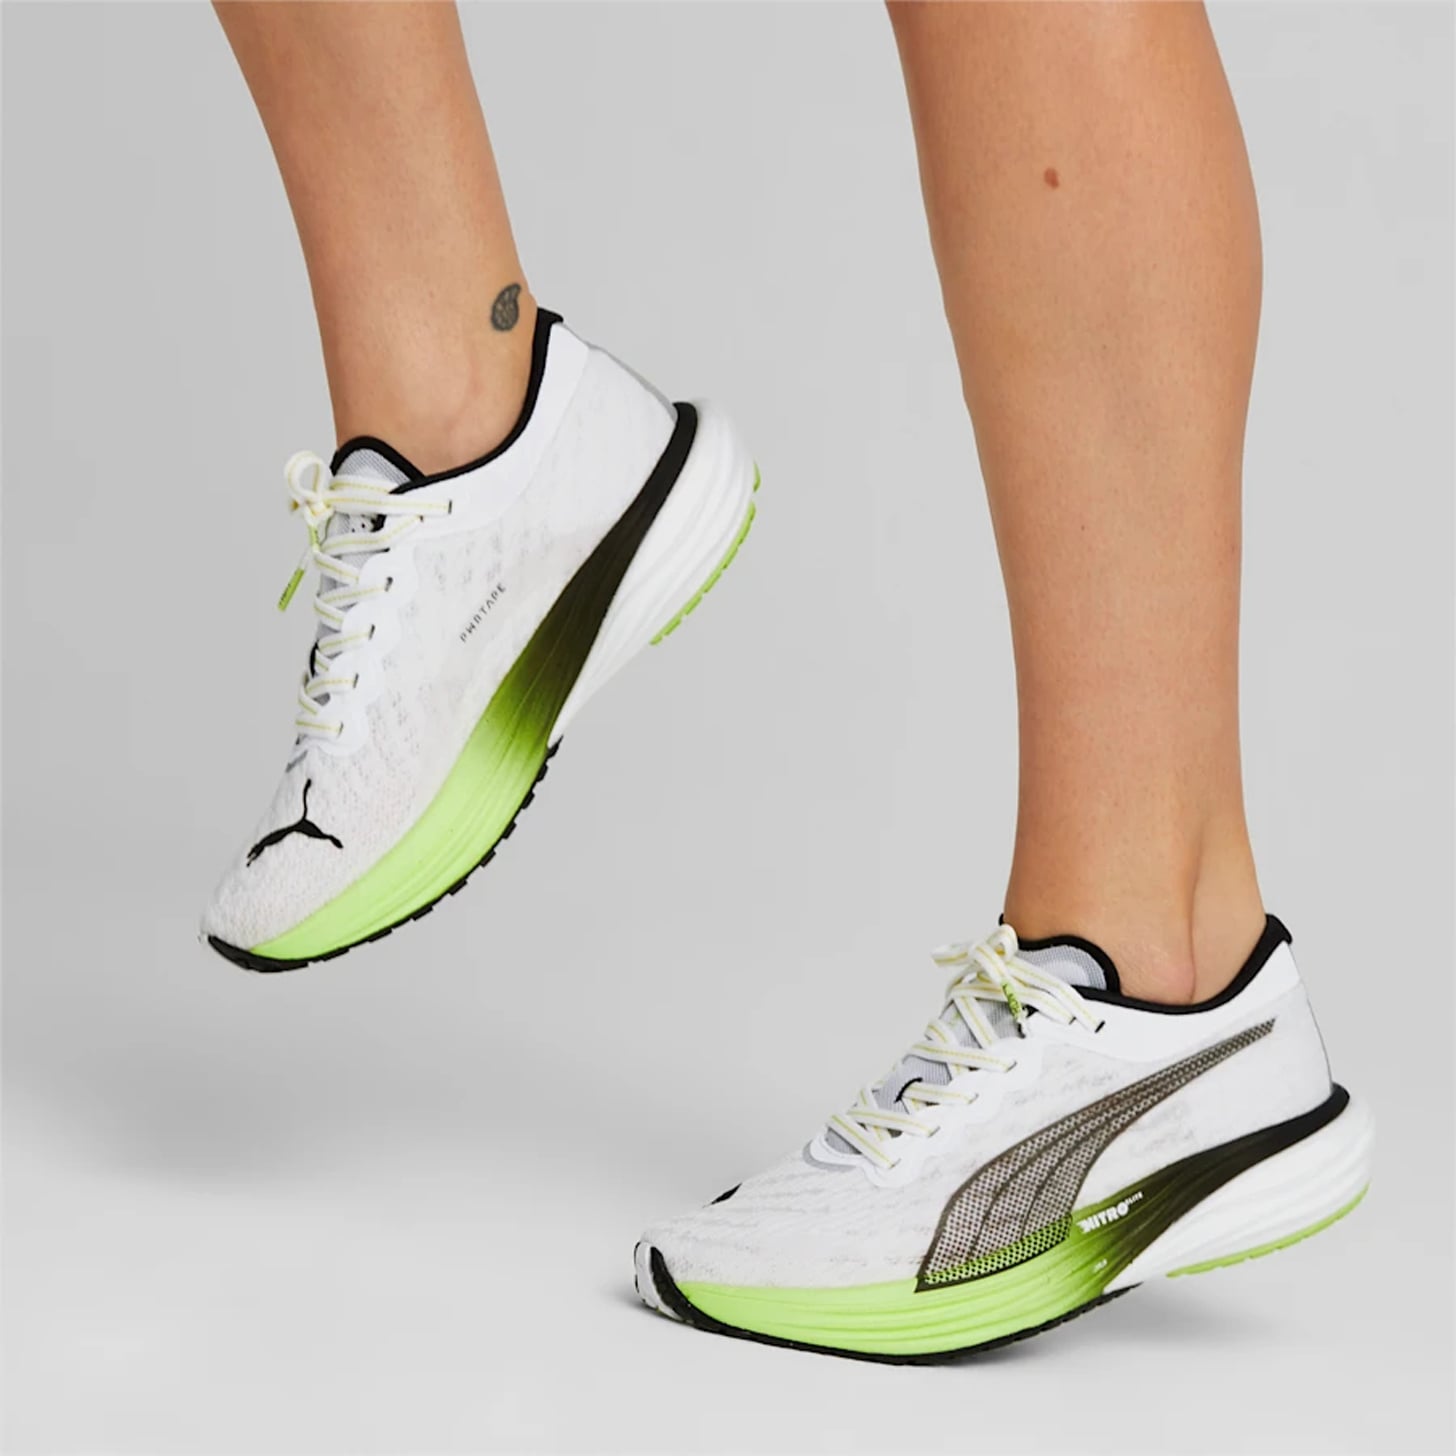 New Nike Running Shoes For Women